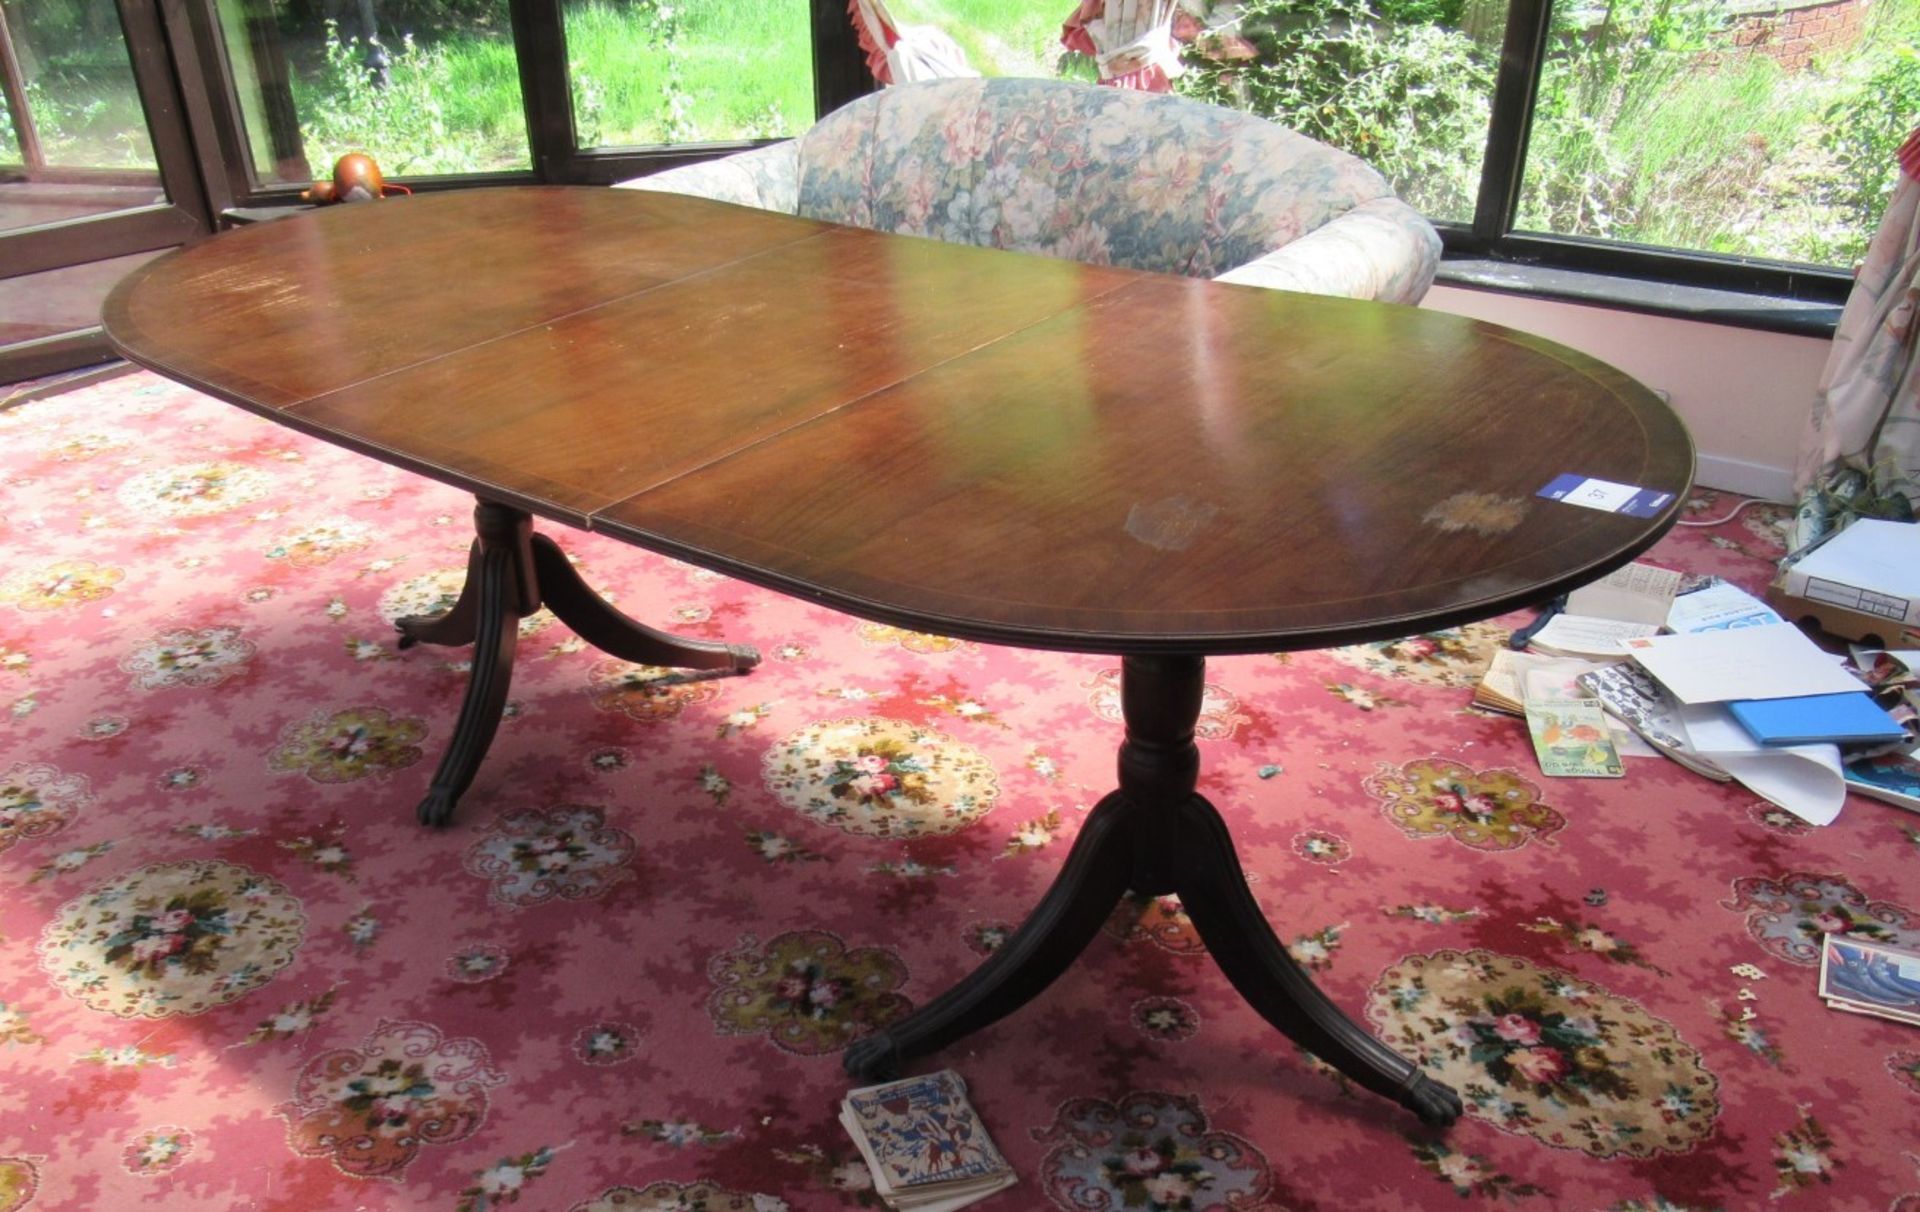 Dark Oak Effect Shaped Claw Foot Dining Room Table 2200 x 1000